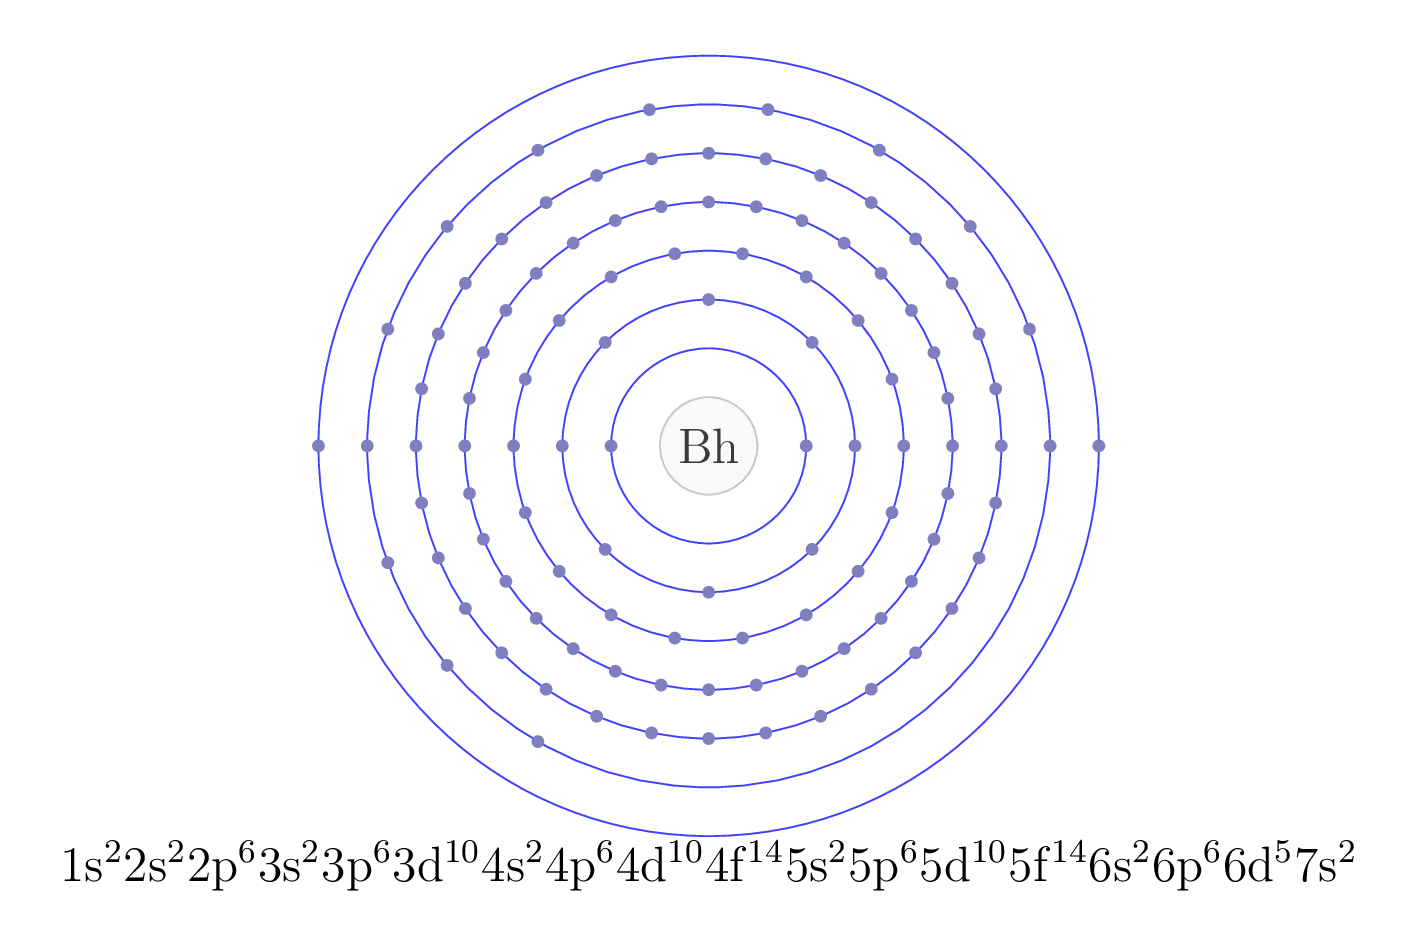 electron configuration of element Bh